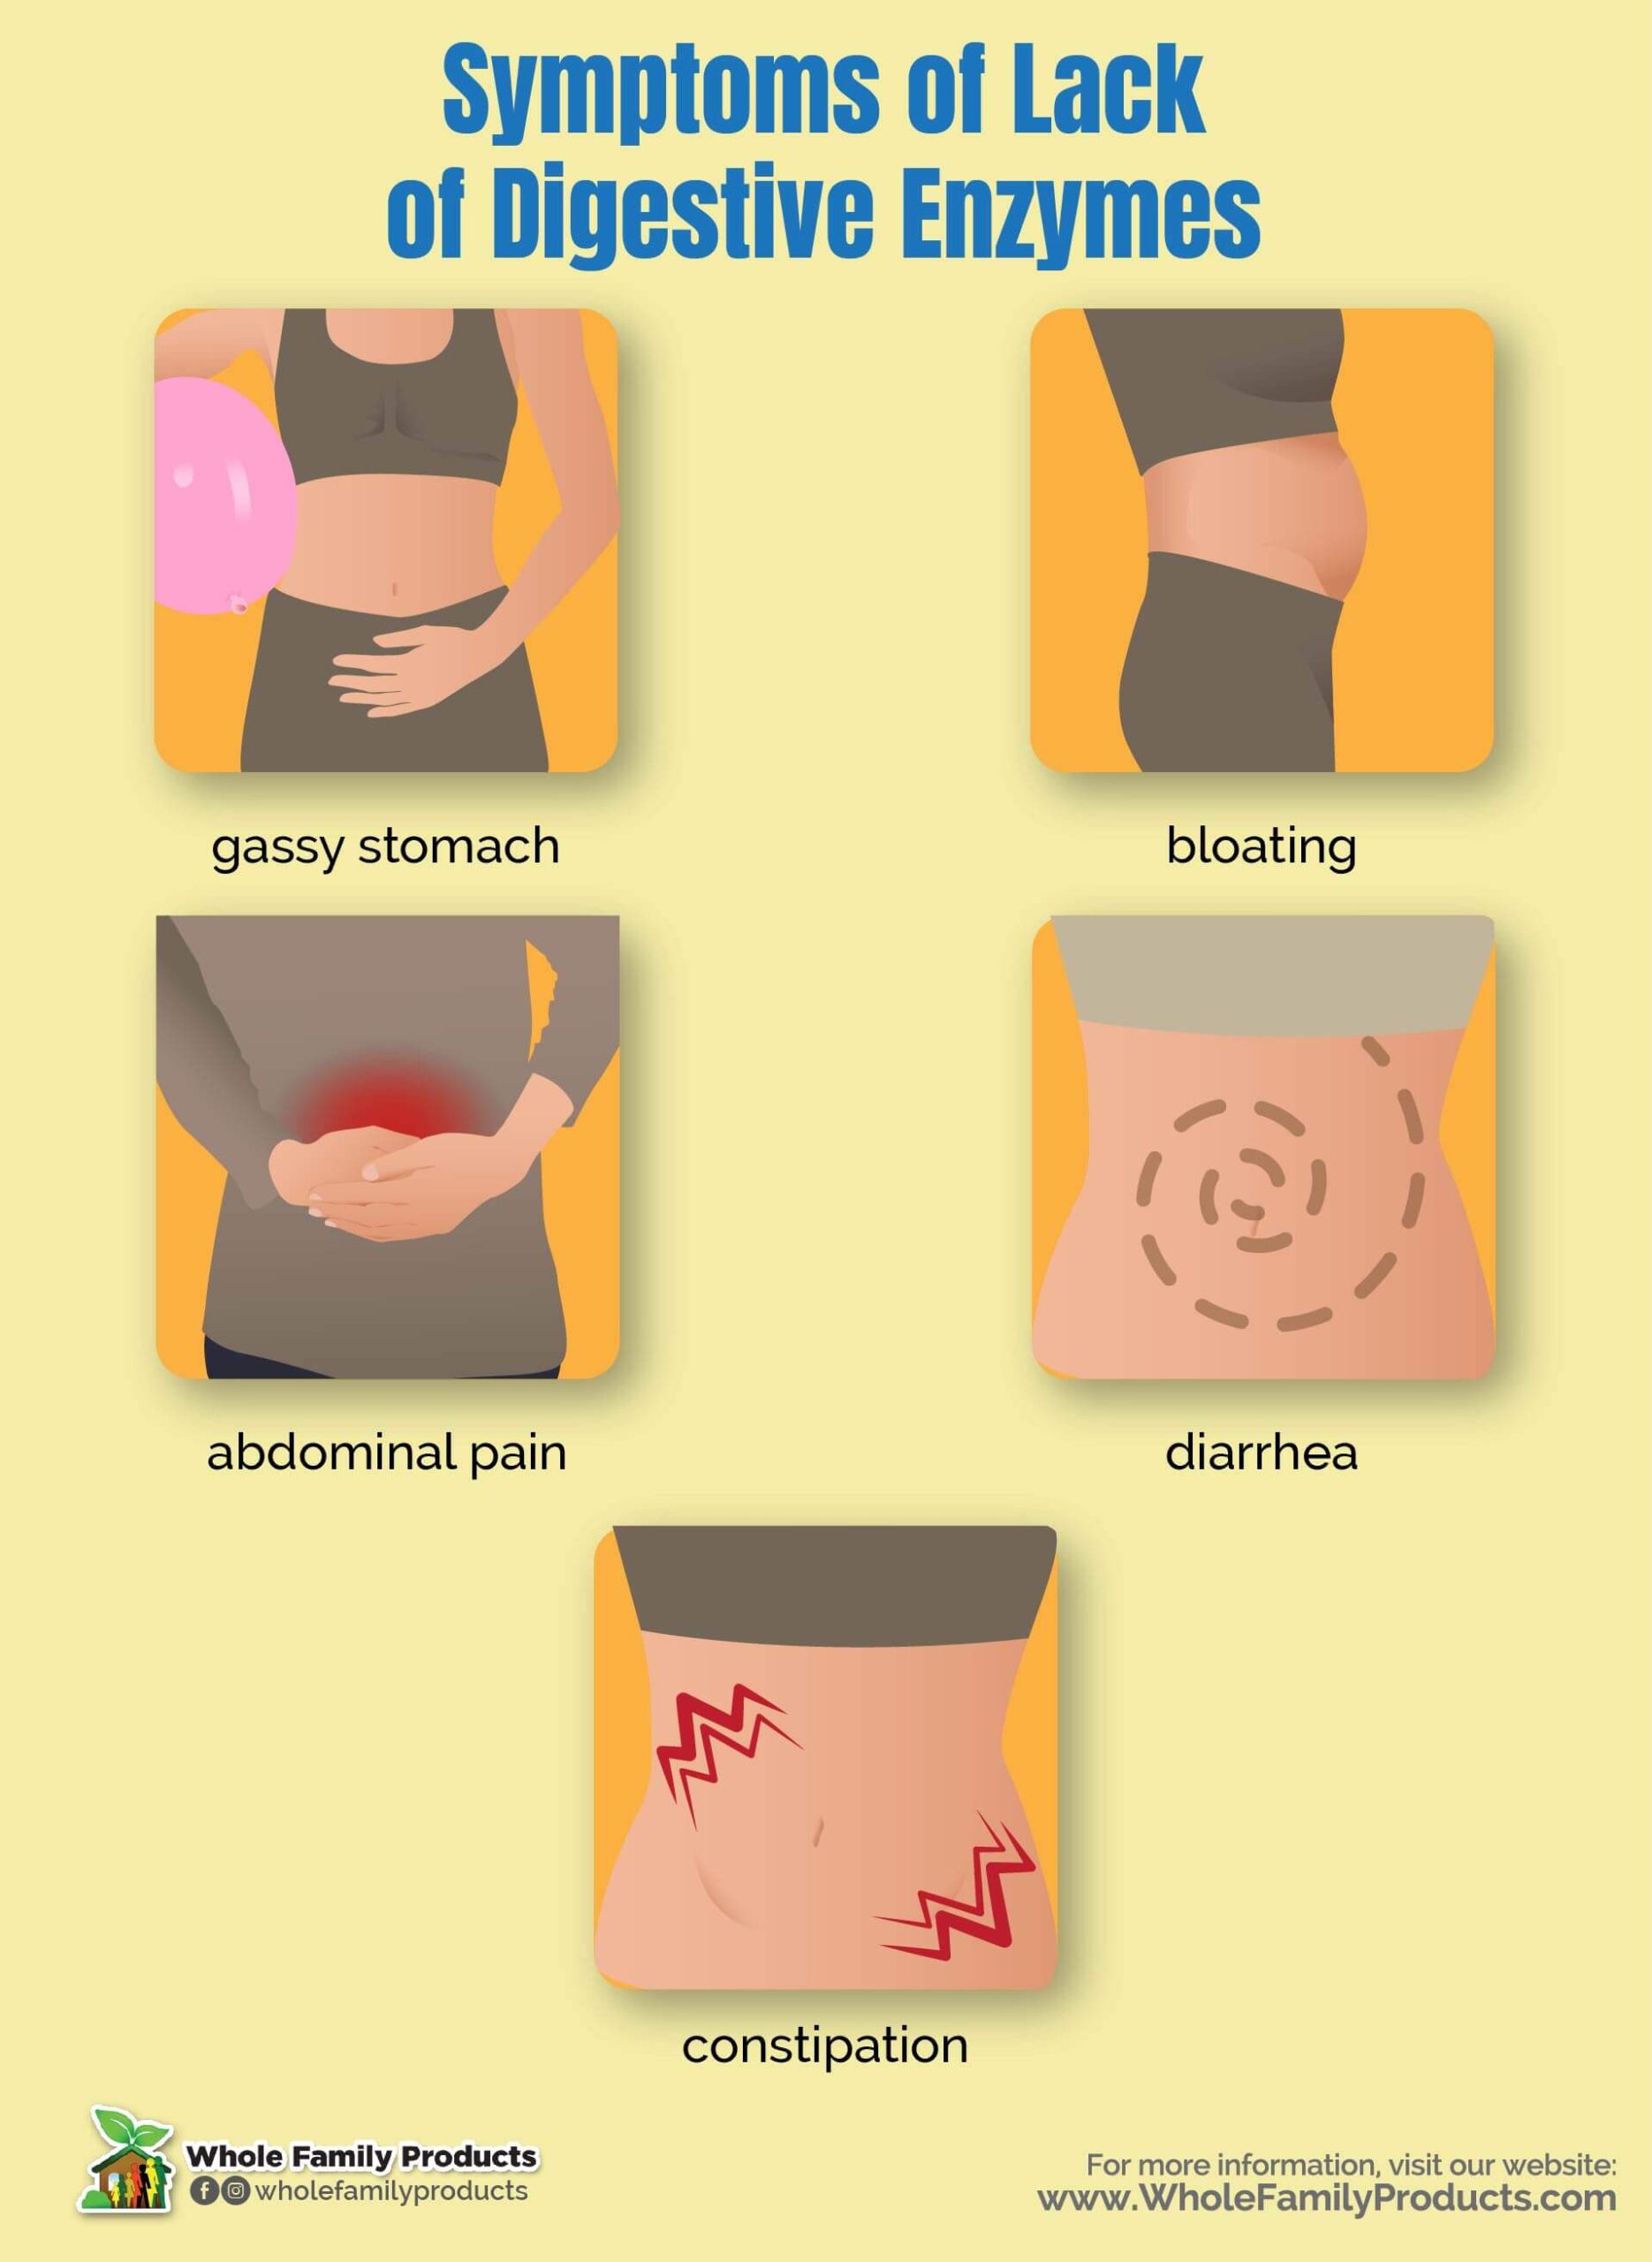 Symptoms of Lack of Digestive Enzymes